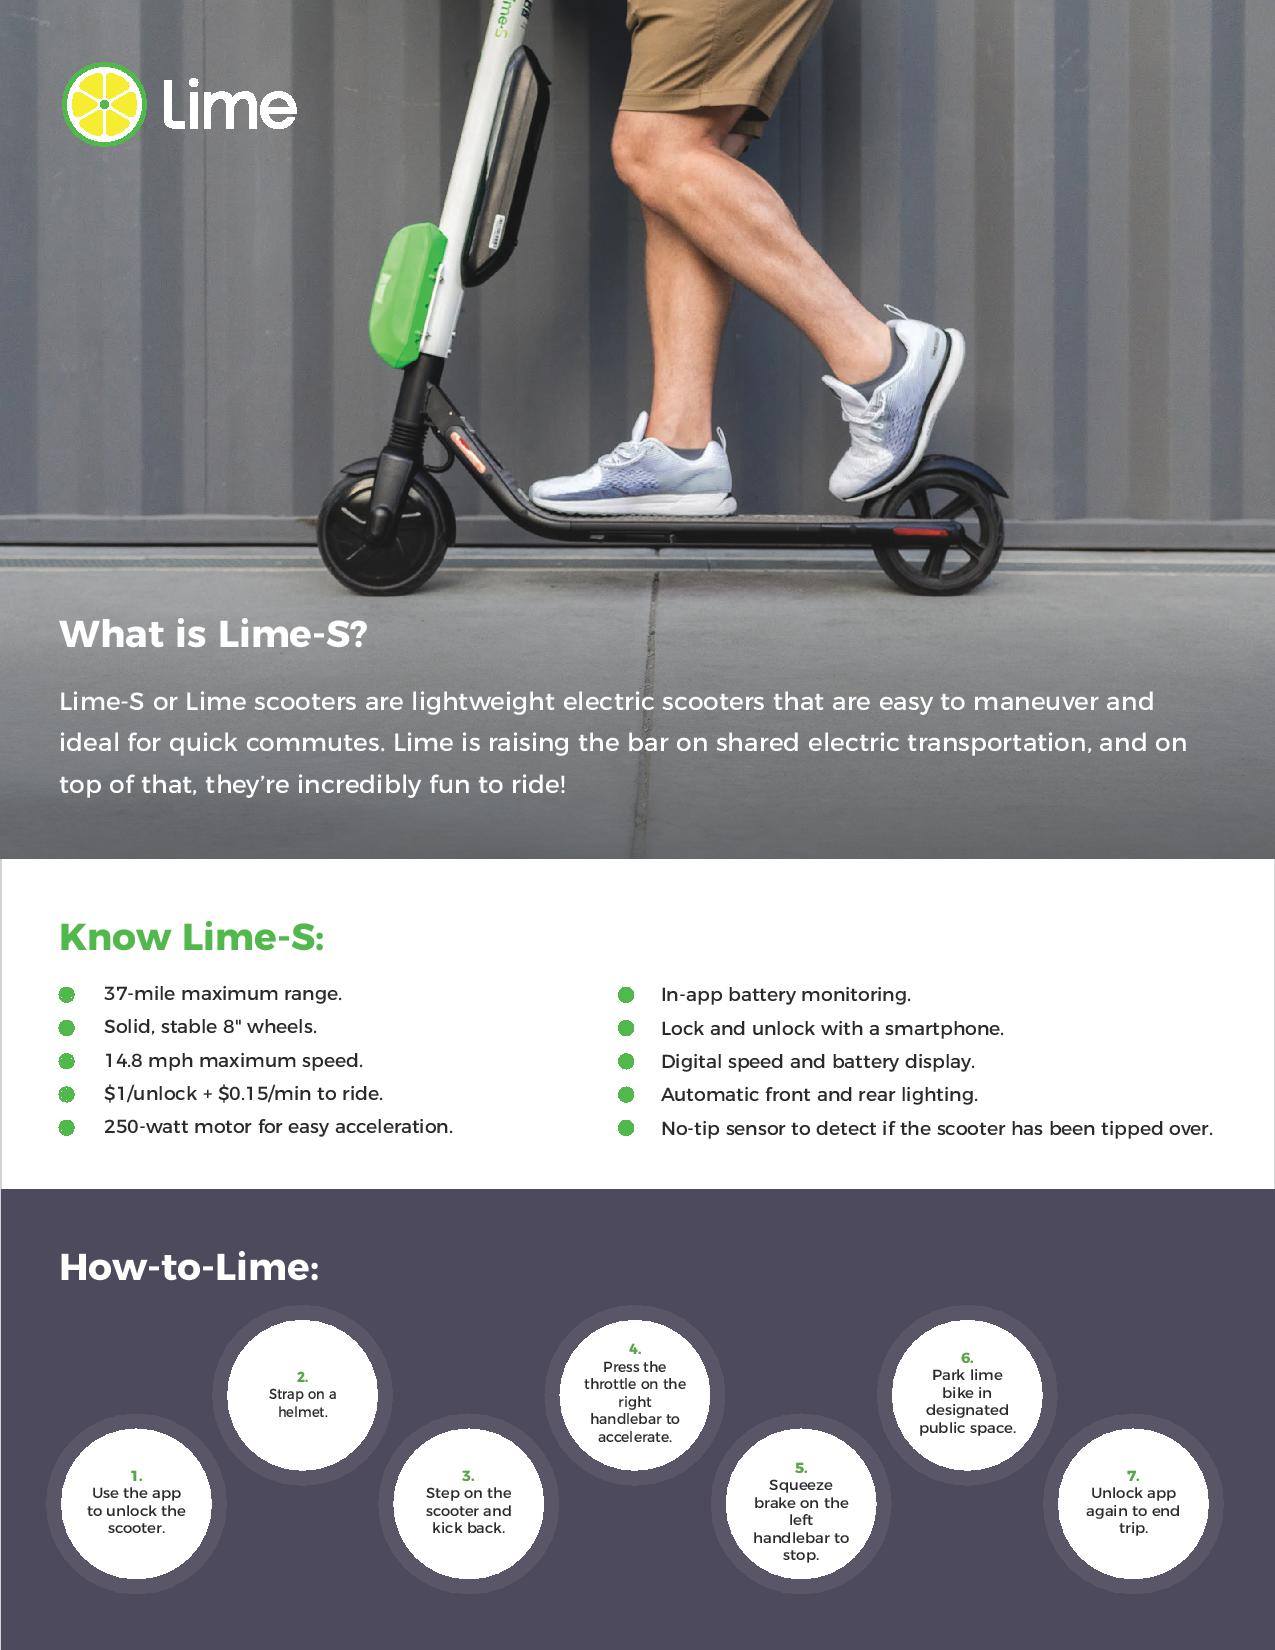 How to Easily Pay for Lime Scooter Rides: Quick Tips & Tricks